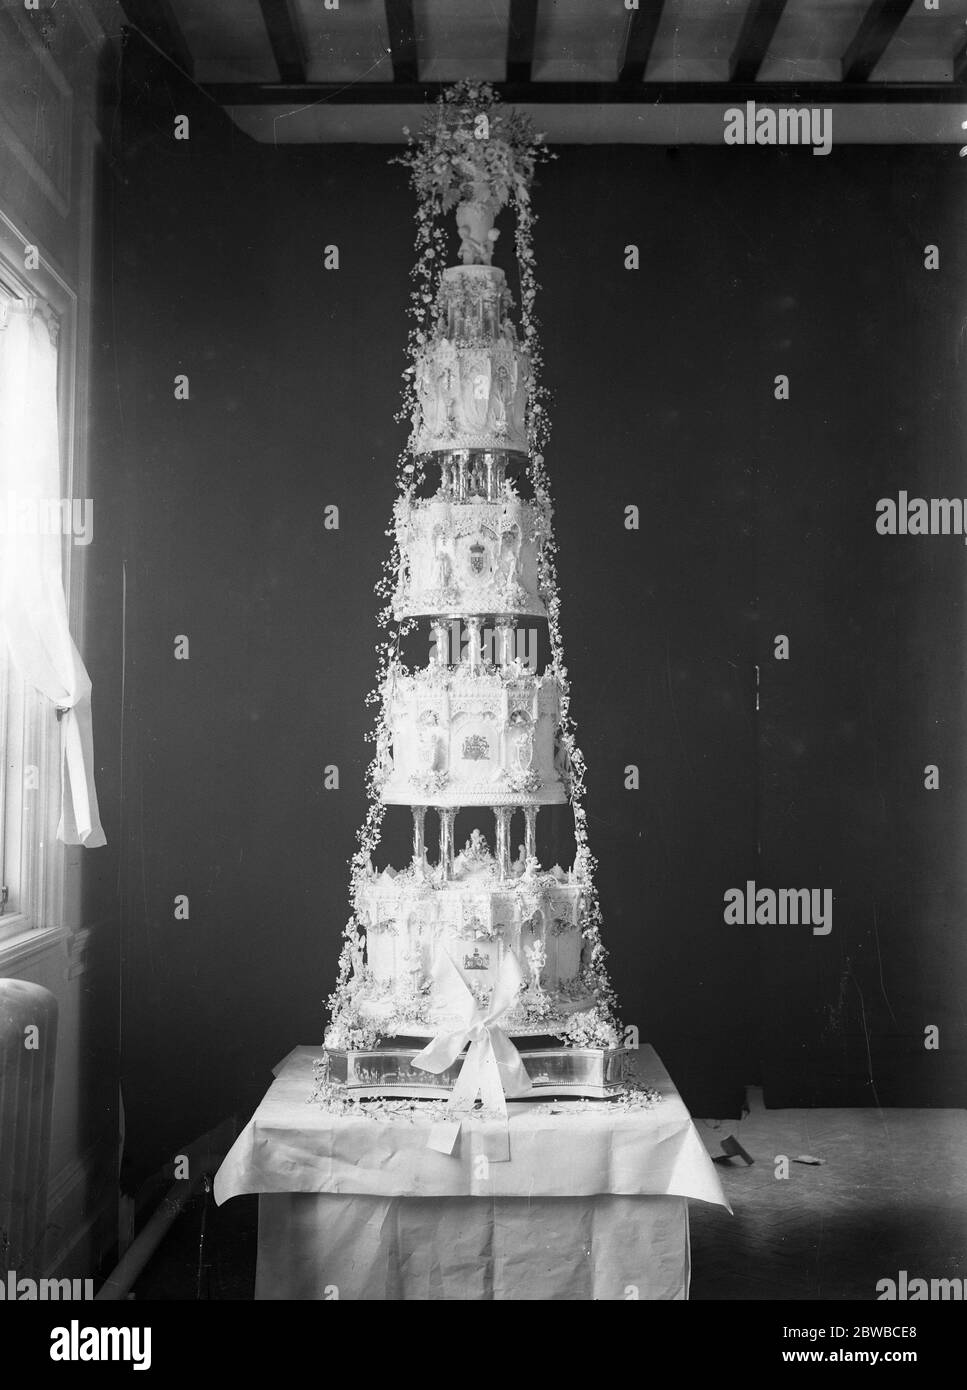 Wedding of the Duke of Kent and Princess Marina . The Royal wedding cake , by McVitie and Price , 9 feet high and weighing some 800 lbs , the four tiers are separated by solid silver pillars , its style semi grecian . Stock Photo